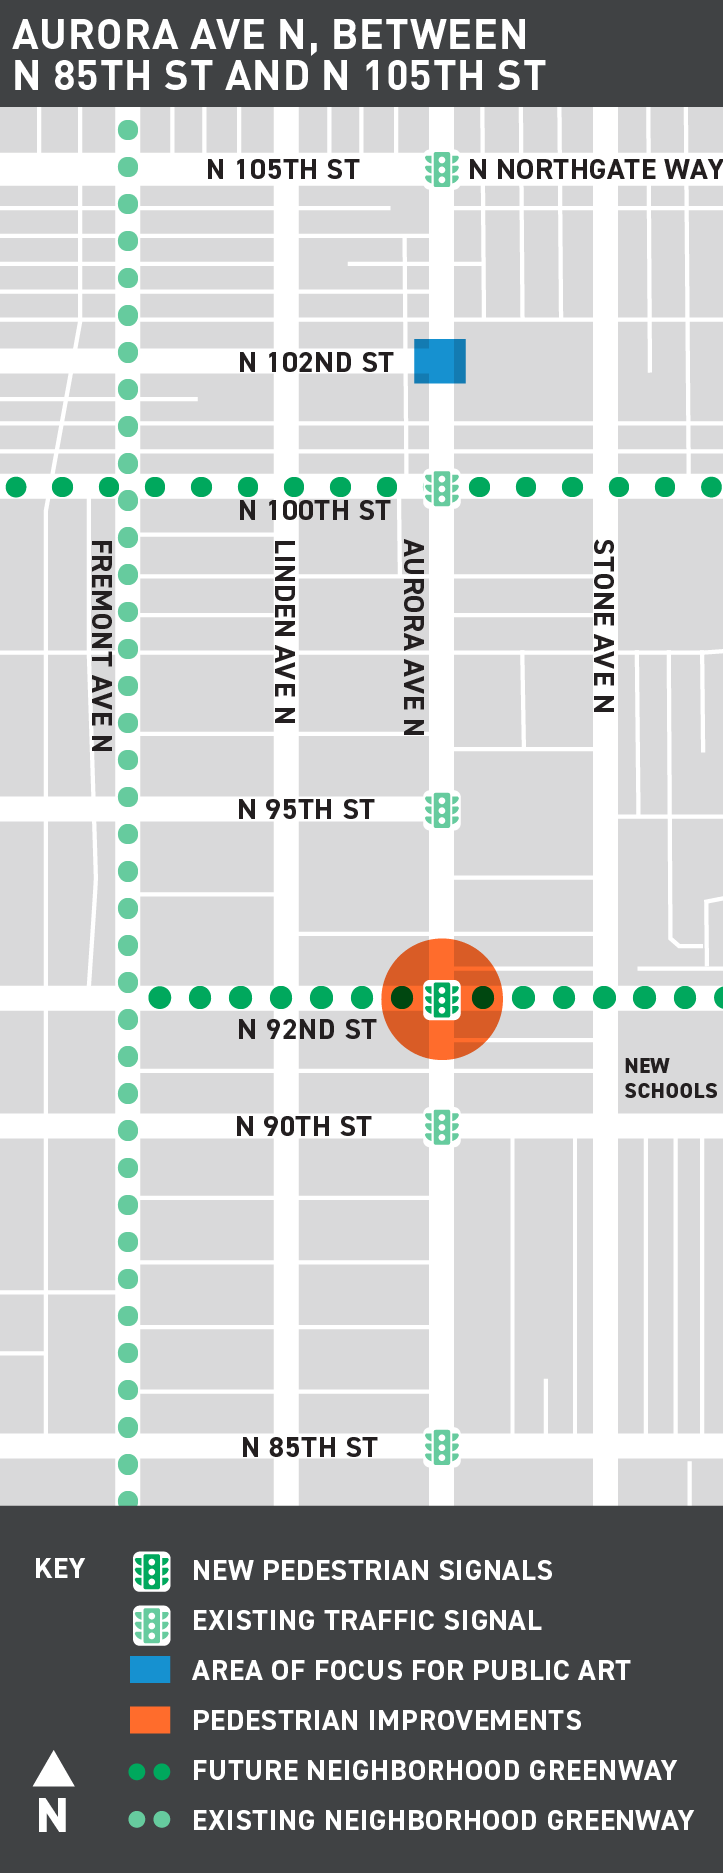 Map of Aurora Ave N, between N 85th and N 10th St